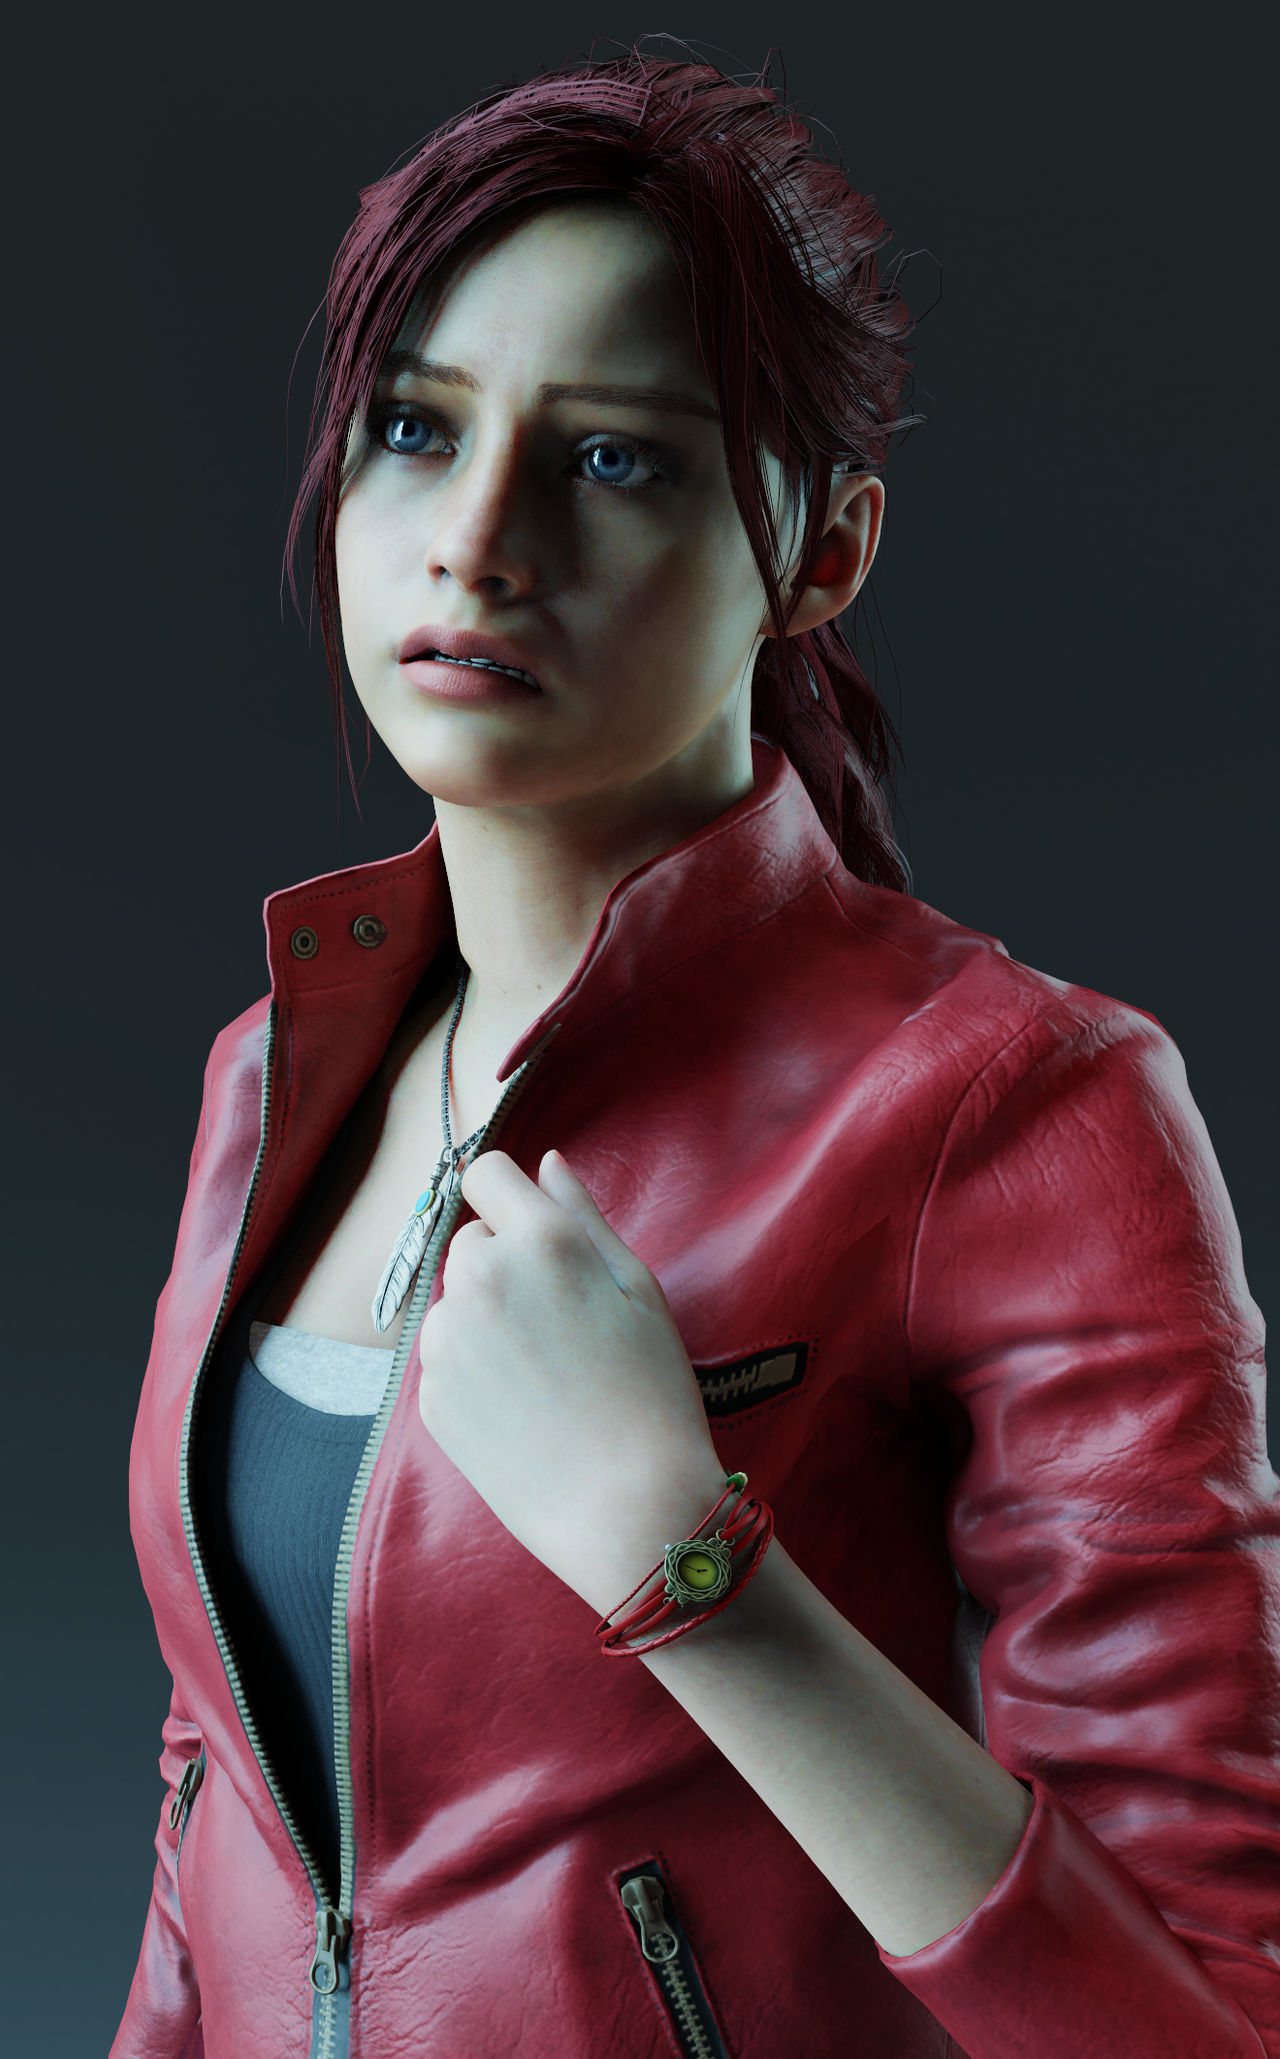 Ada Wong's Profile by Isobel-Theroux on DeviantArt